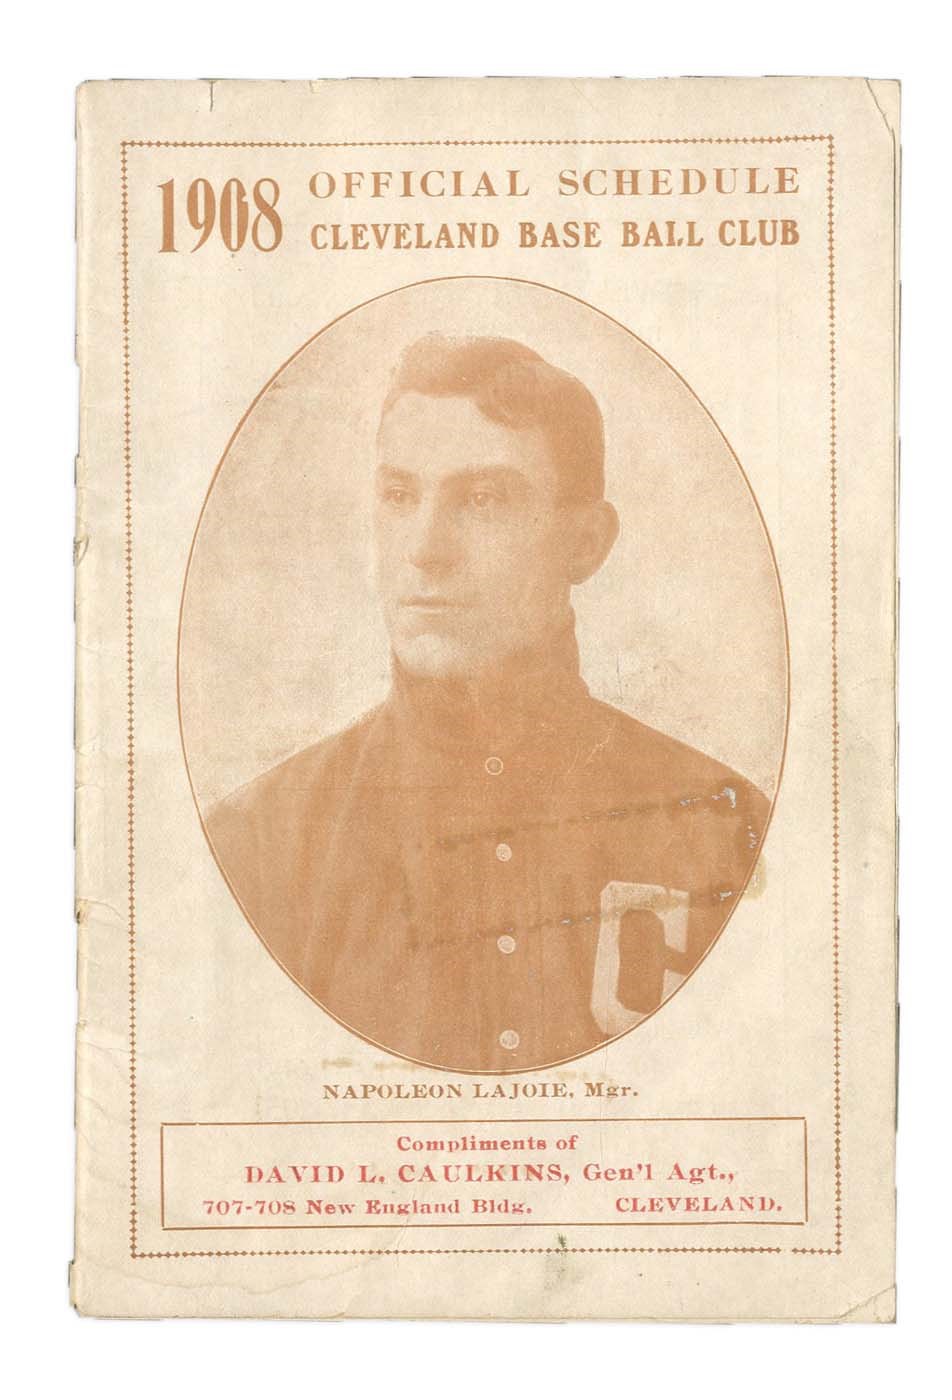 - Very Rare 1908 Cleveland Base Ball Yearbook/Schedule